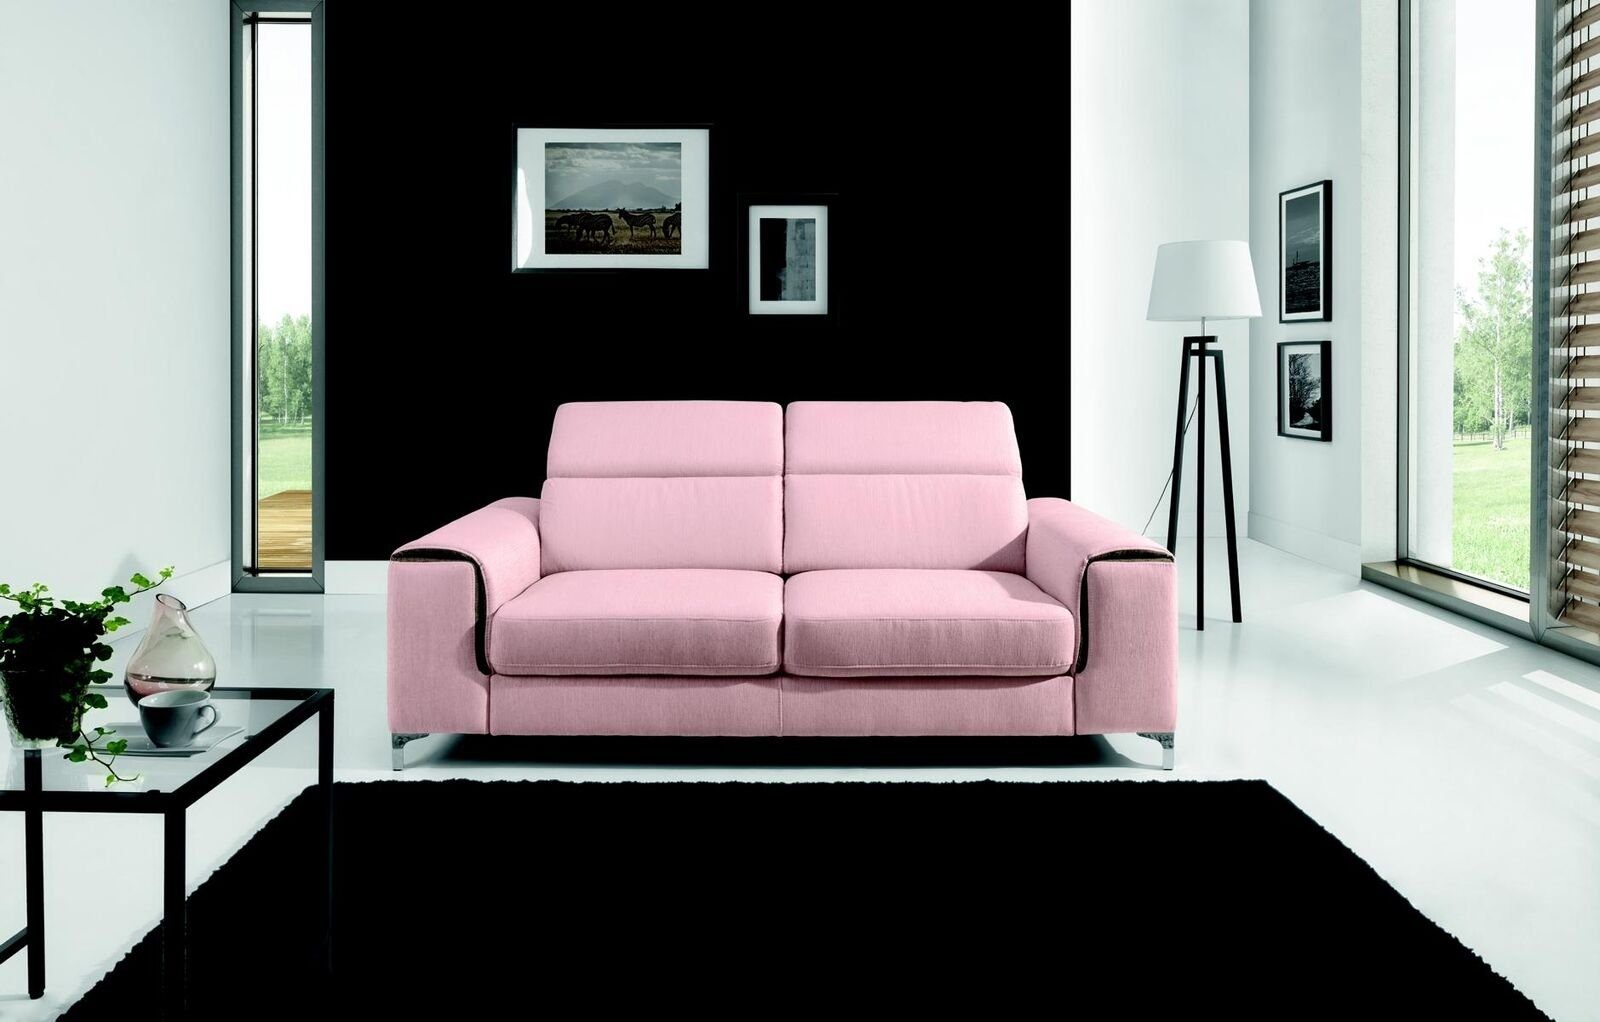 JVmoebel Sofa Designer Rosa Polster Sitz Couch 2 Sitzer Sofa Sofas Holz Couch, Made in Europe